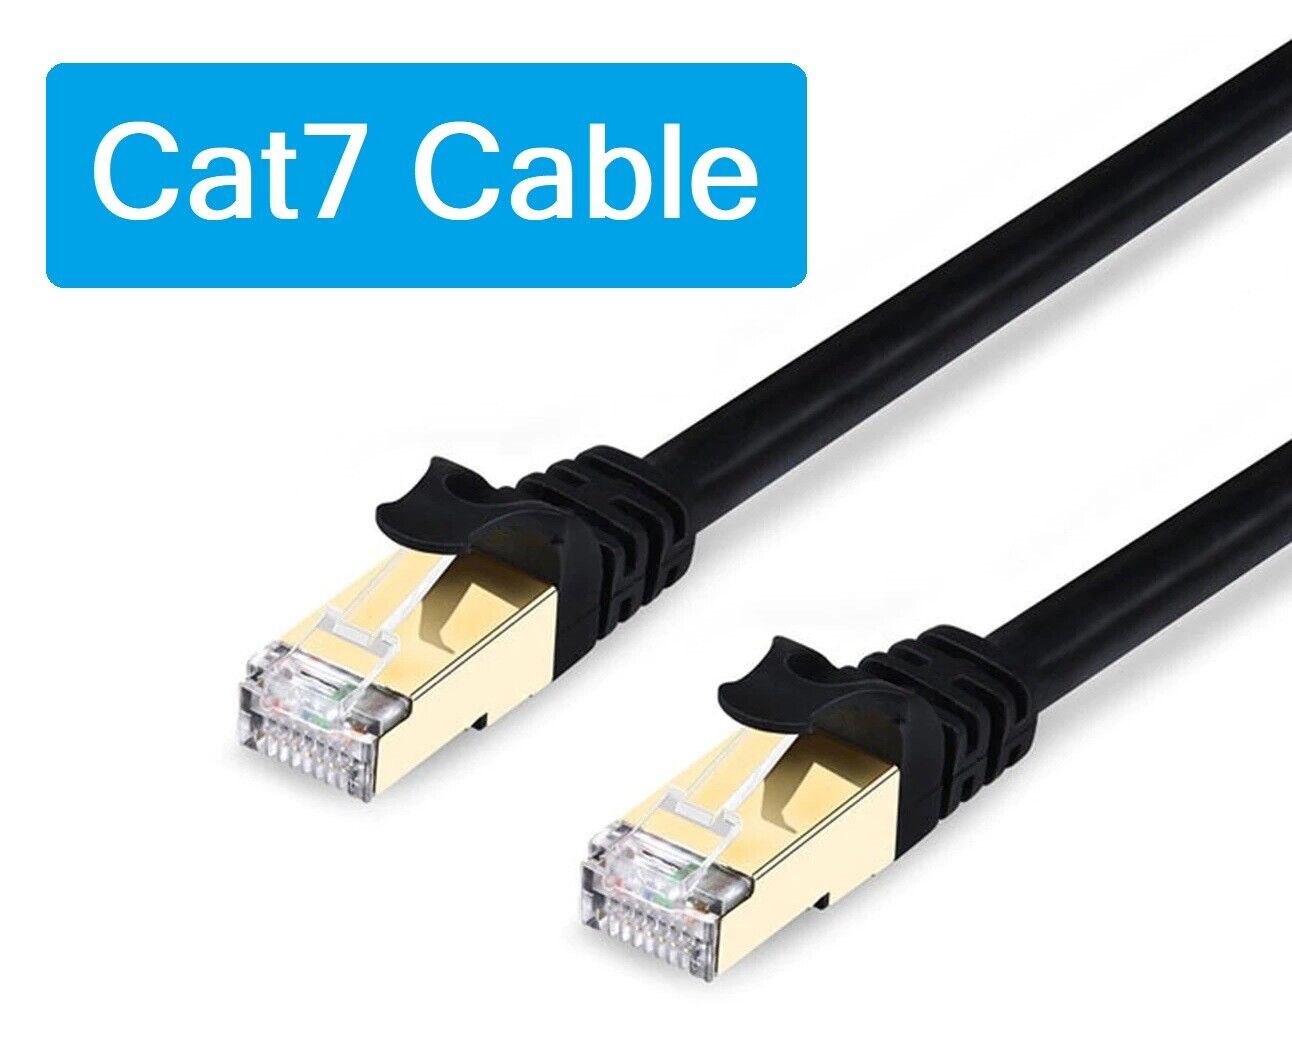 20 ft CAT7 Ethernet Cable 2 PACK - Premium High Speed LAN Patch Cord Gold Plated